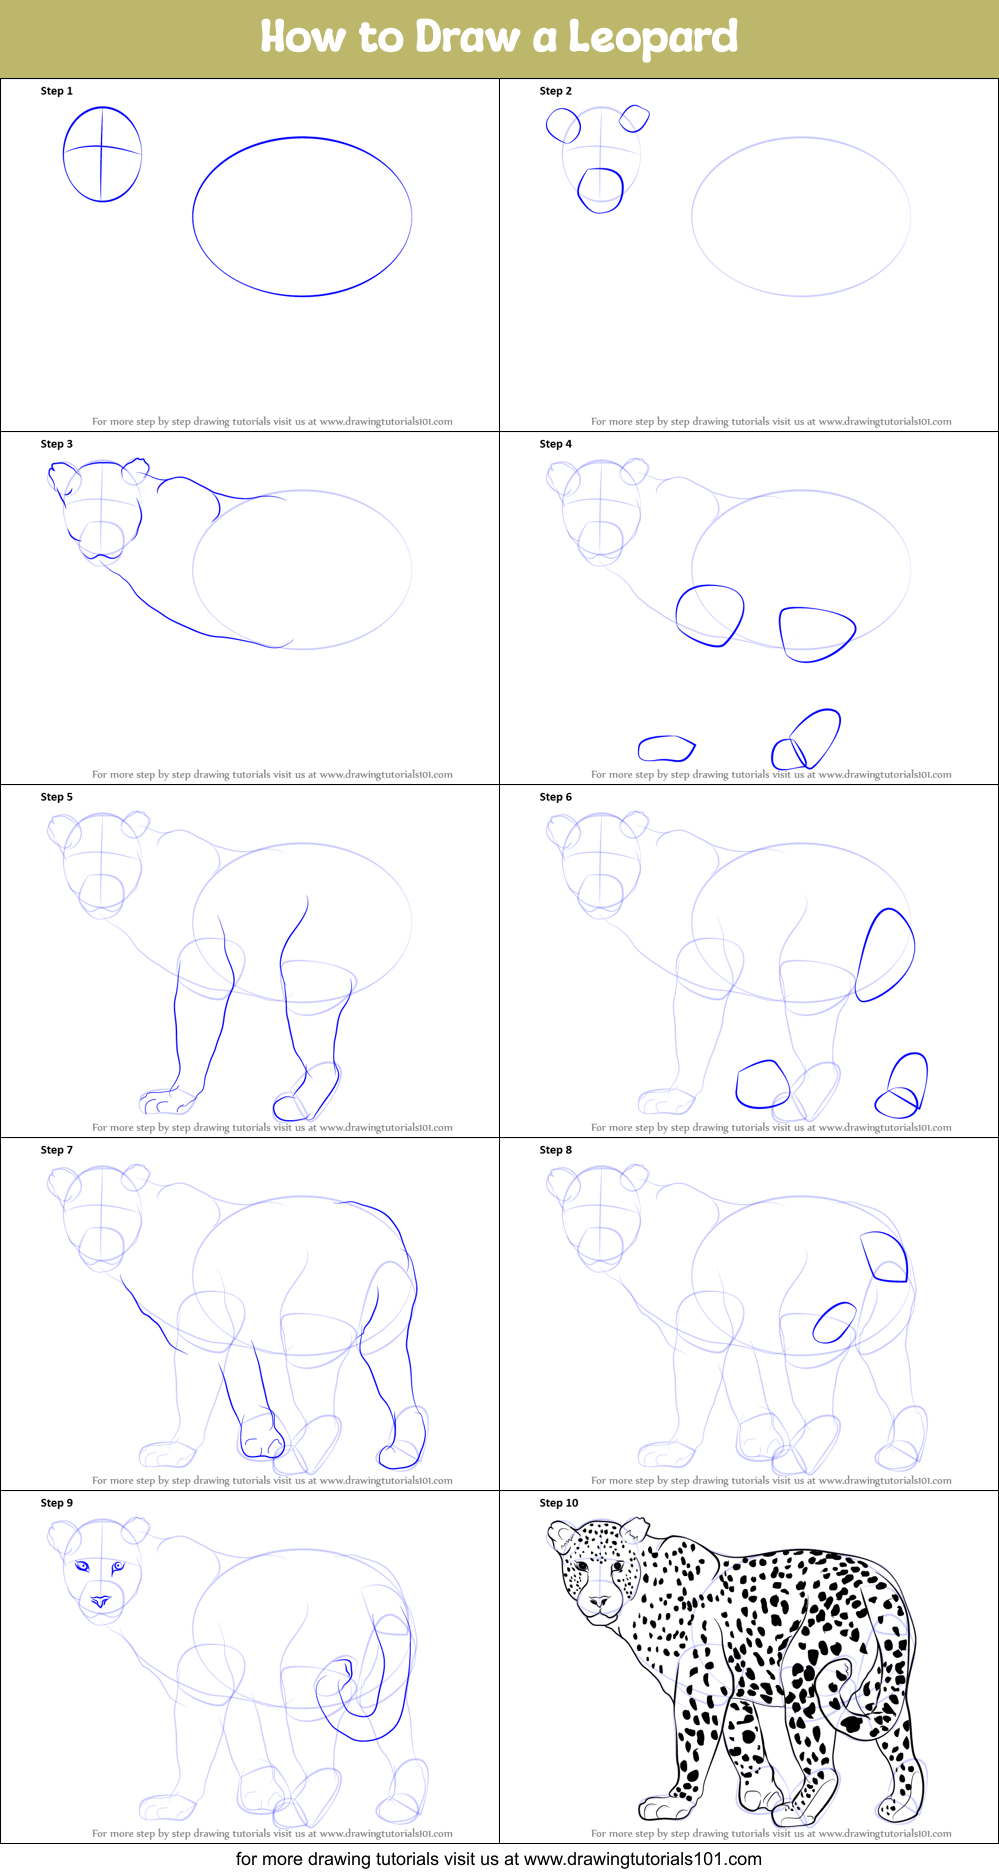 How to Draw a Leopard printable step by step drawing sheet